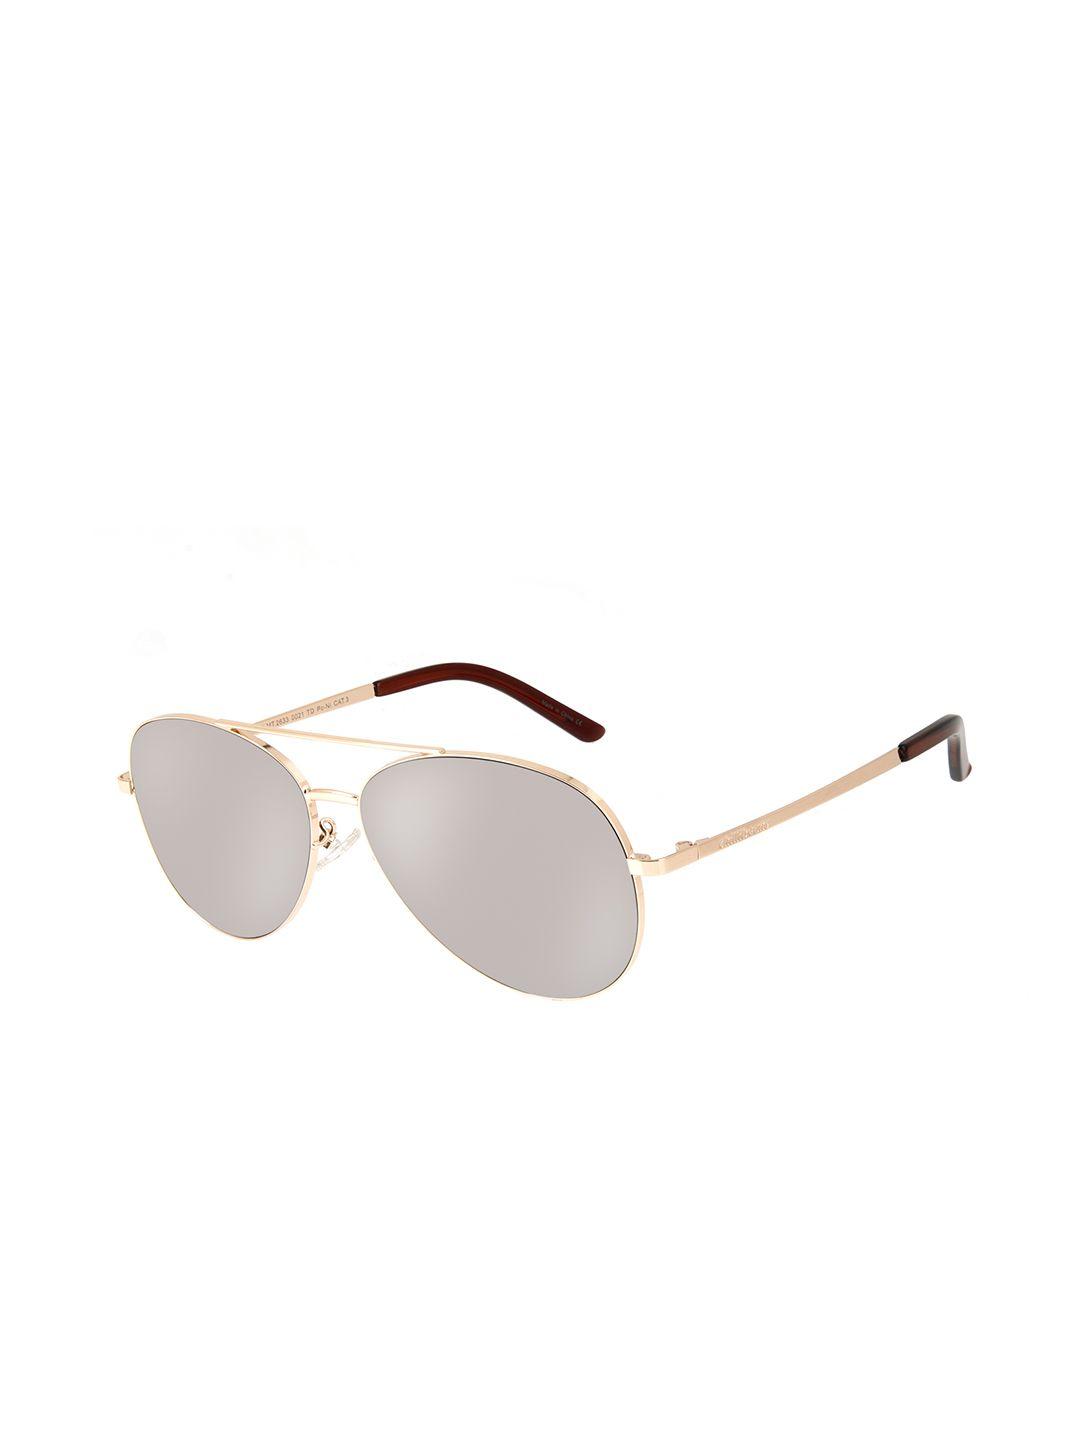 chilli beans unisex grey lens & gold-toned aviator sunglasses with uv protected lens